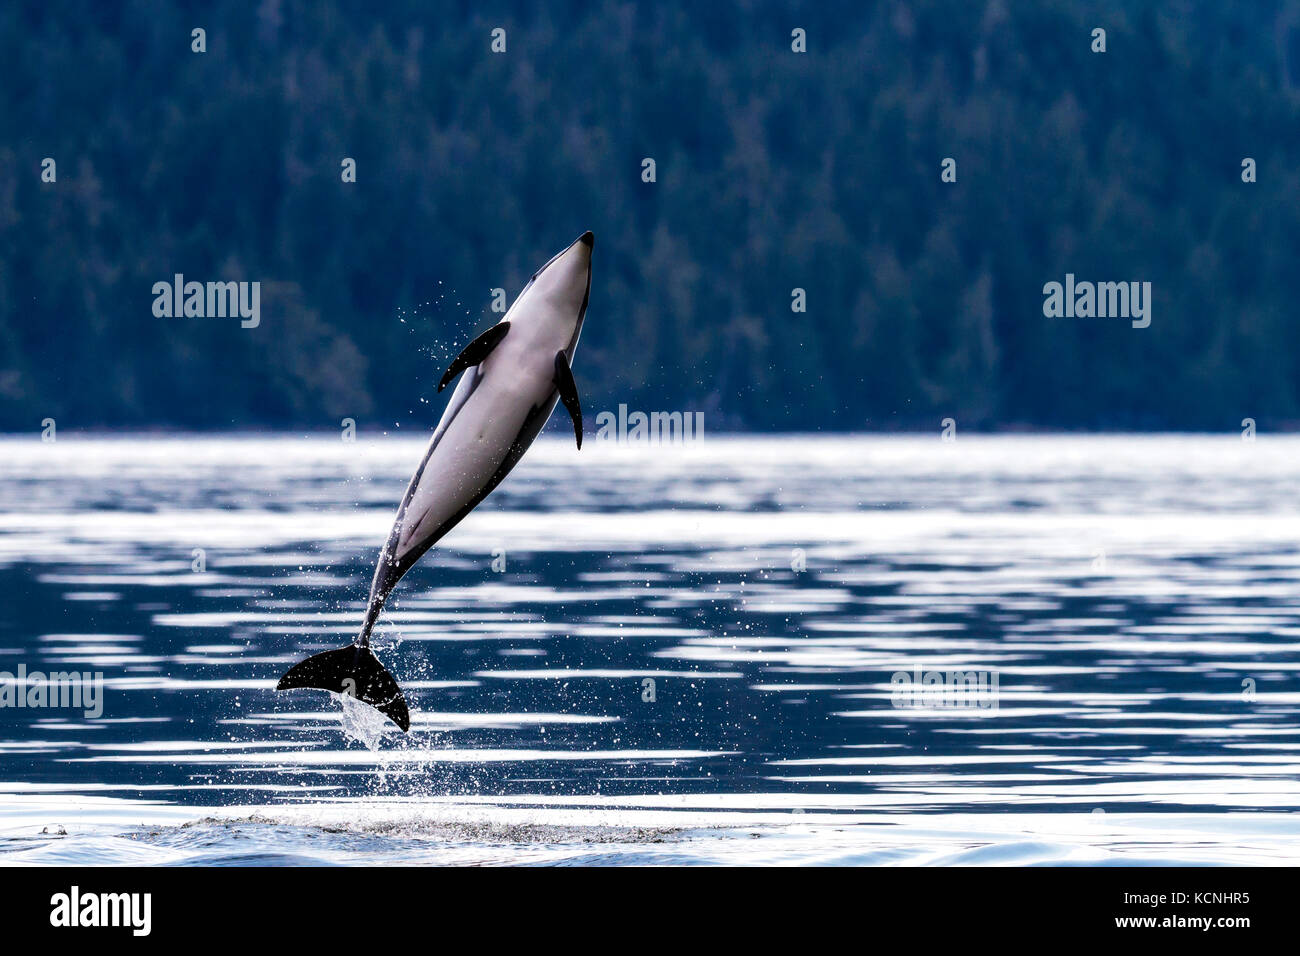 Pacific White Sided Dolphin, Lagenorhynchus obliquidens jumping in Broughton Archipelago Provincial park, British Columbia, Canada Stock Photo